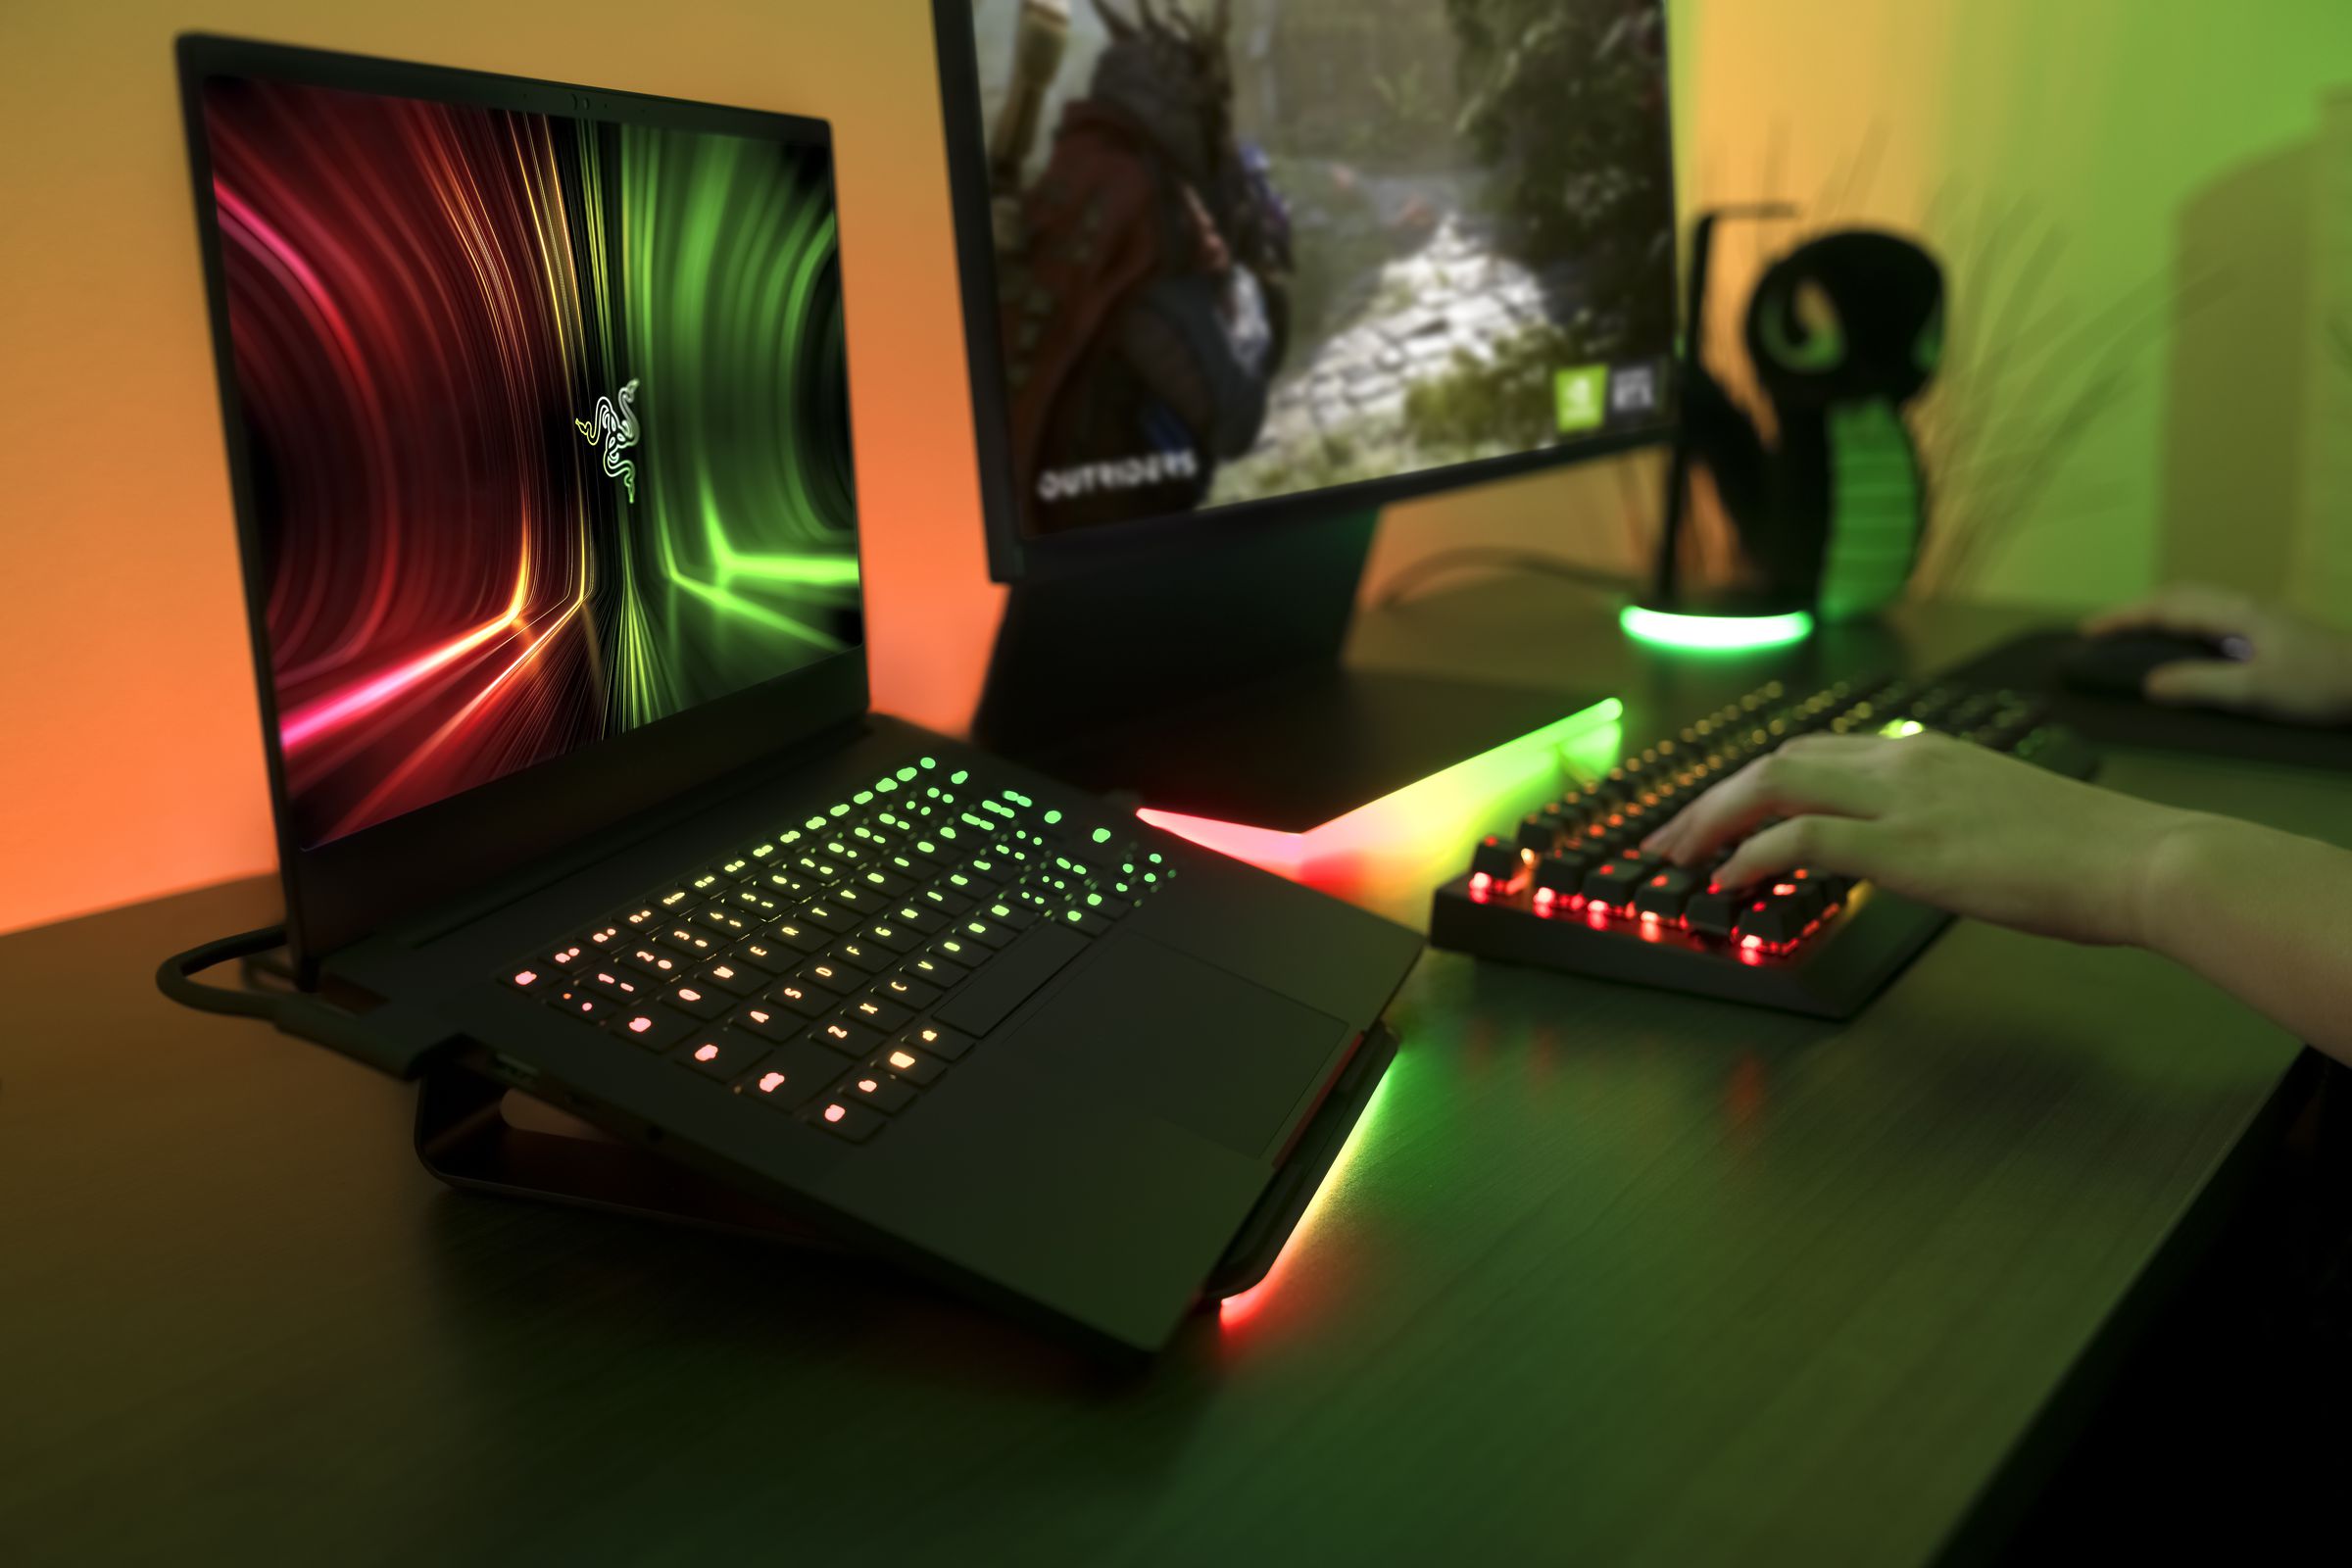 A user uses the Razer Blade 14 on a laptop stand connected to an external mechanical keyboard and monitor. The monitor screen displays a game; the laptop screen displays a Razer logo on a red, black, and green background.